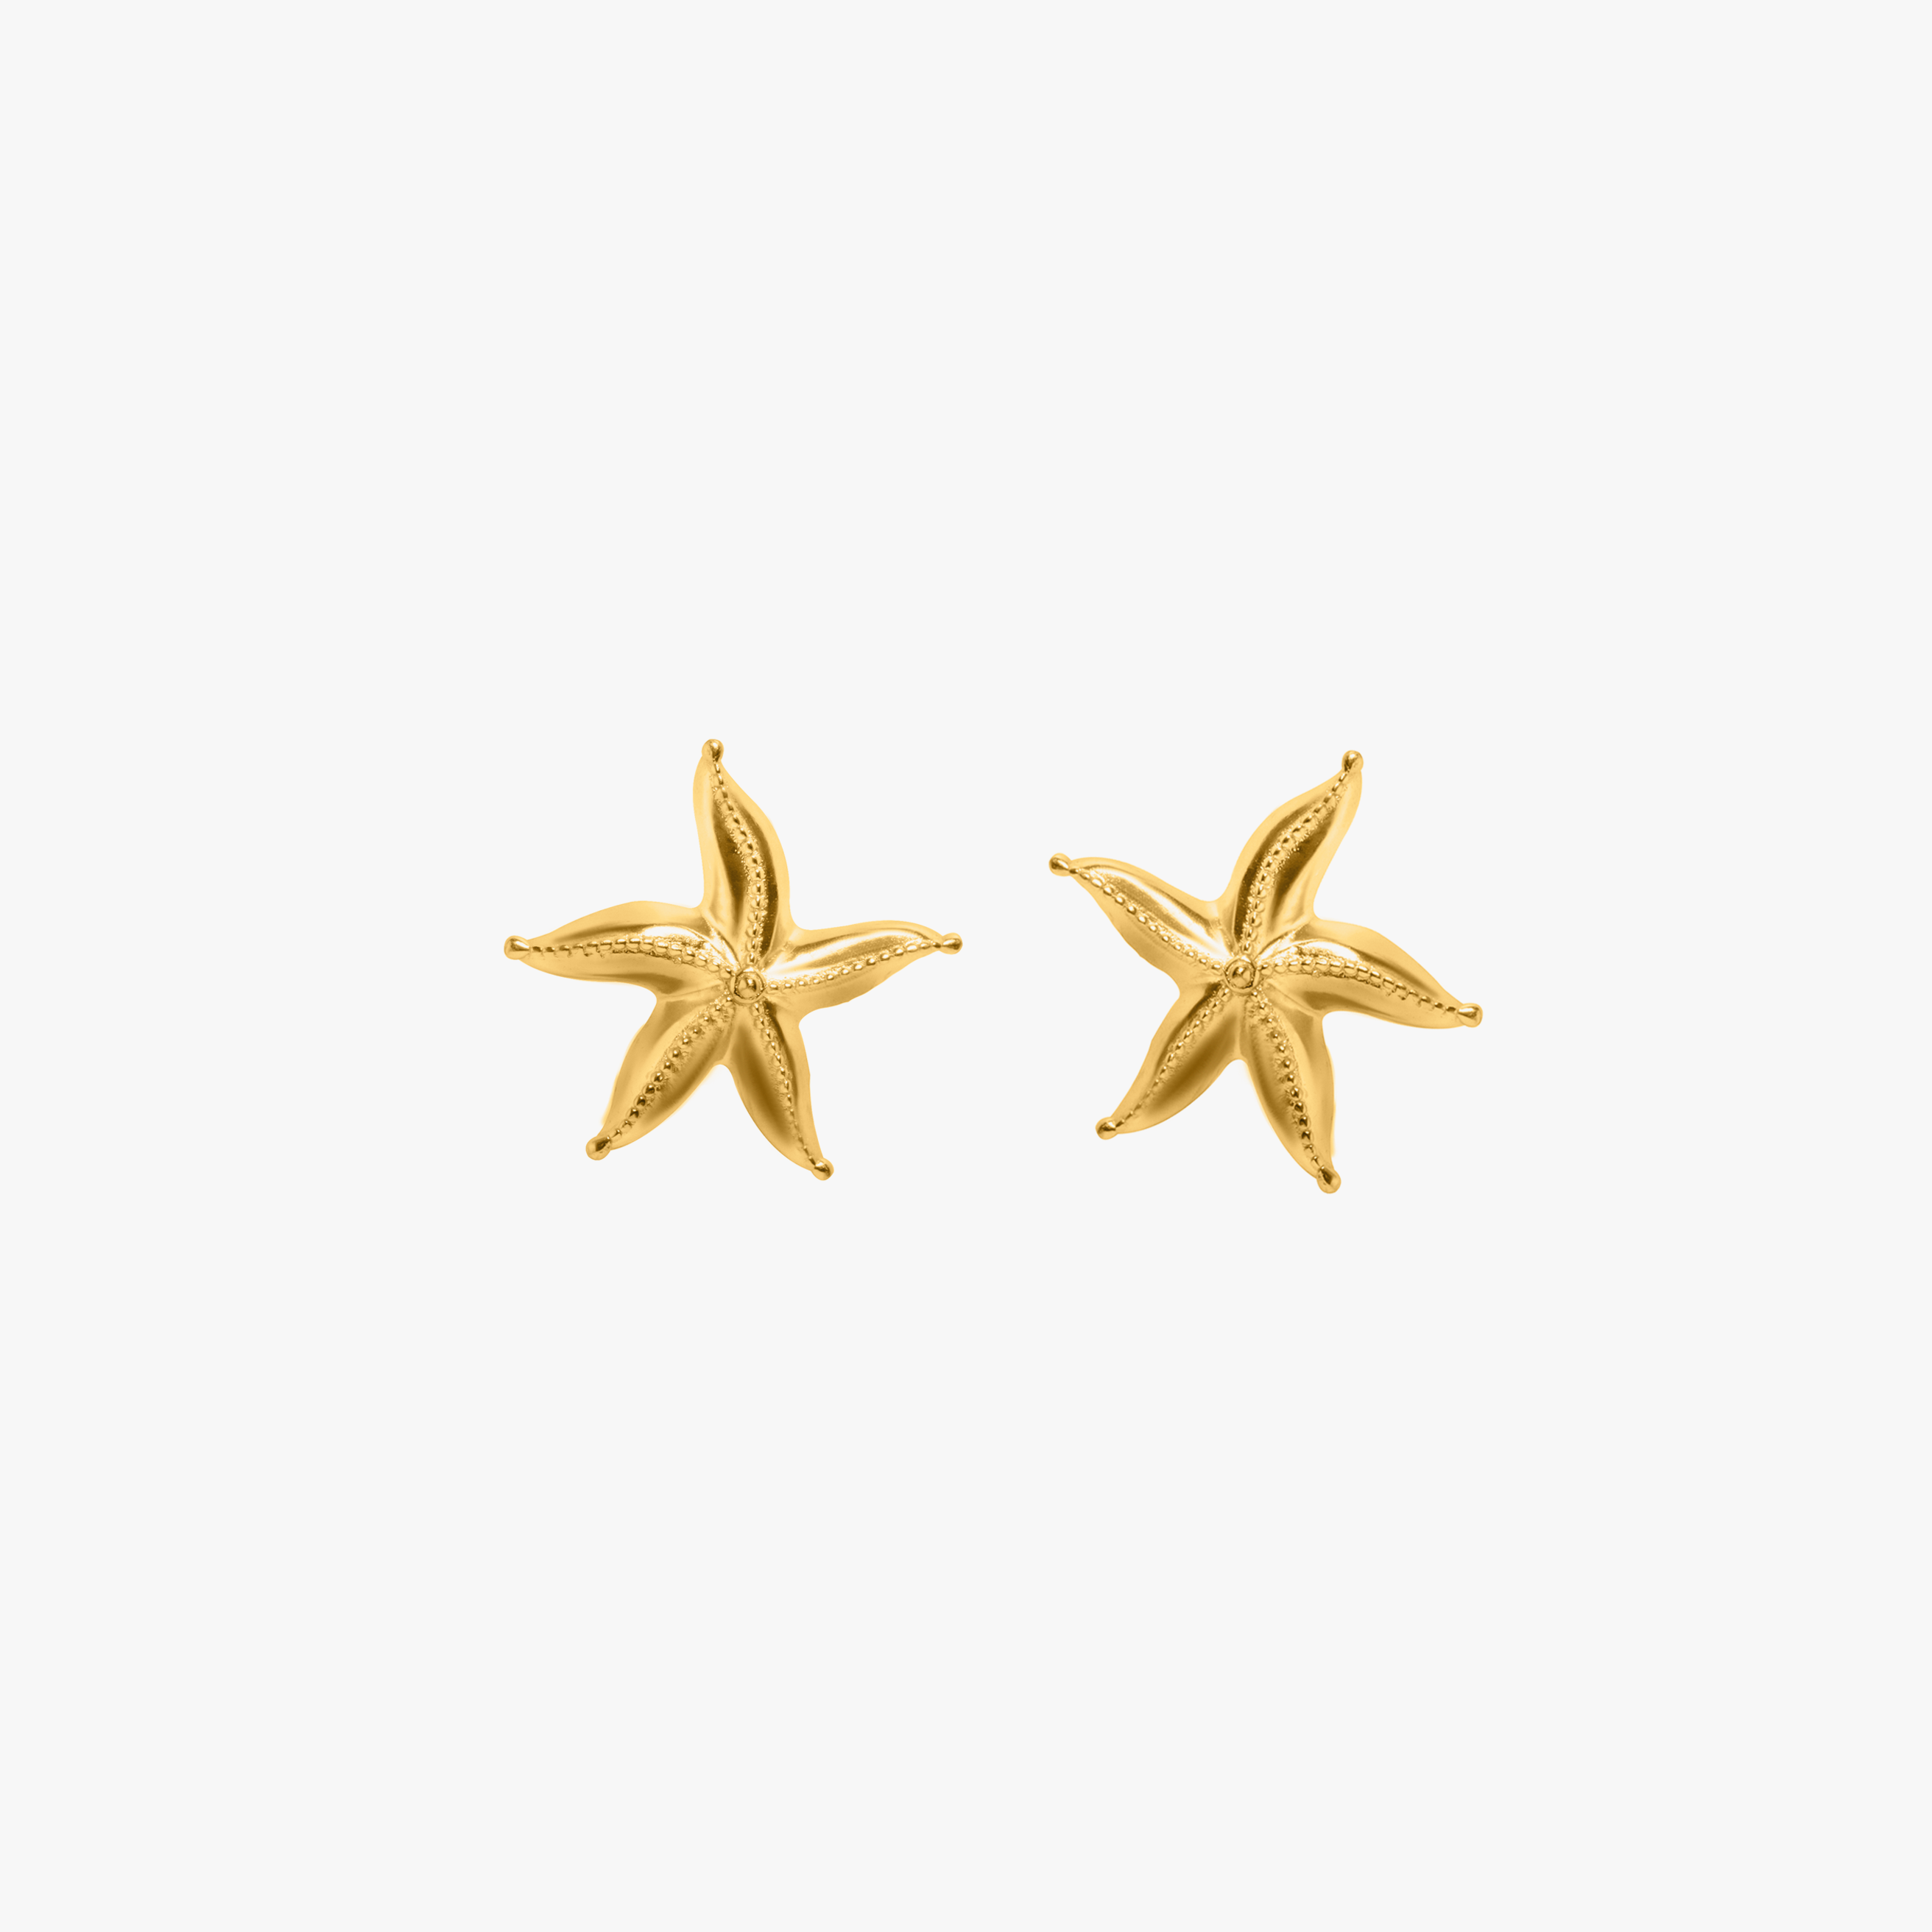 SEA STAR STUDS GOLD TONE , a product by Equiivalence